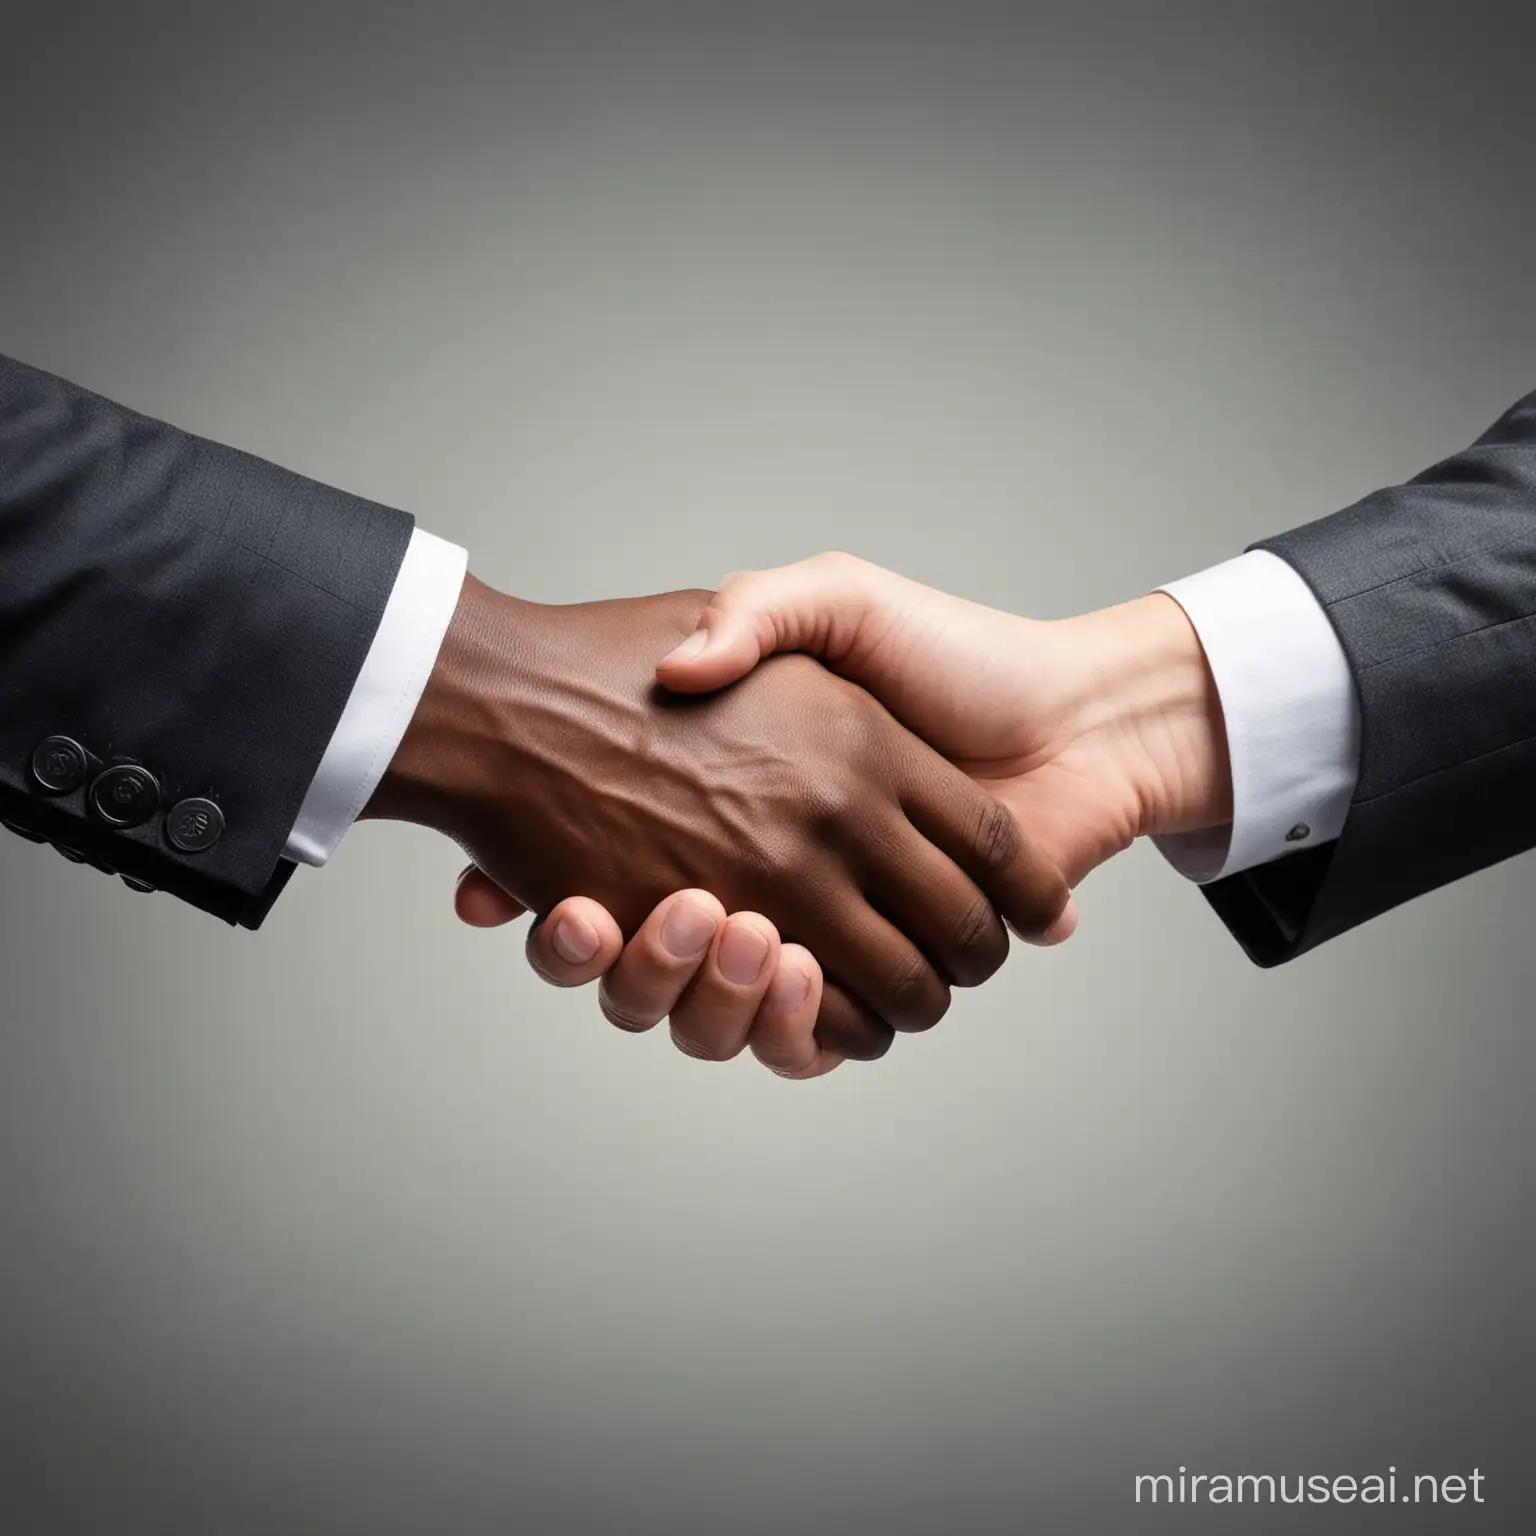 Business Partners Sealing a Deal with Shaking Hands